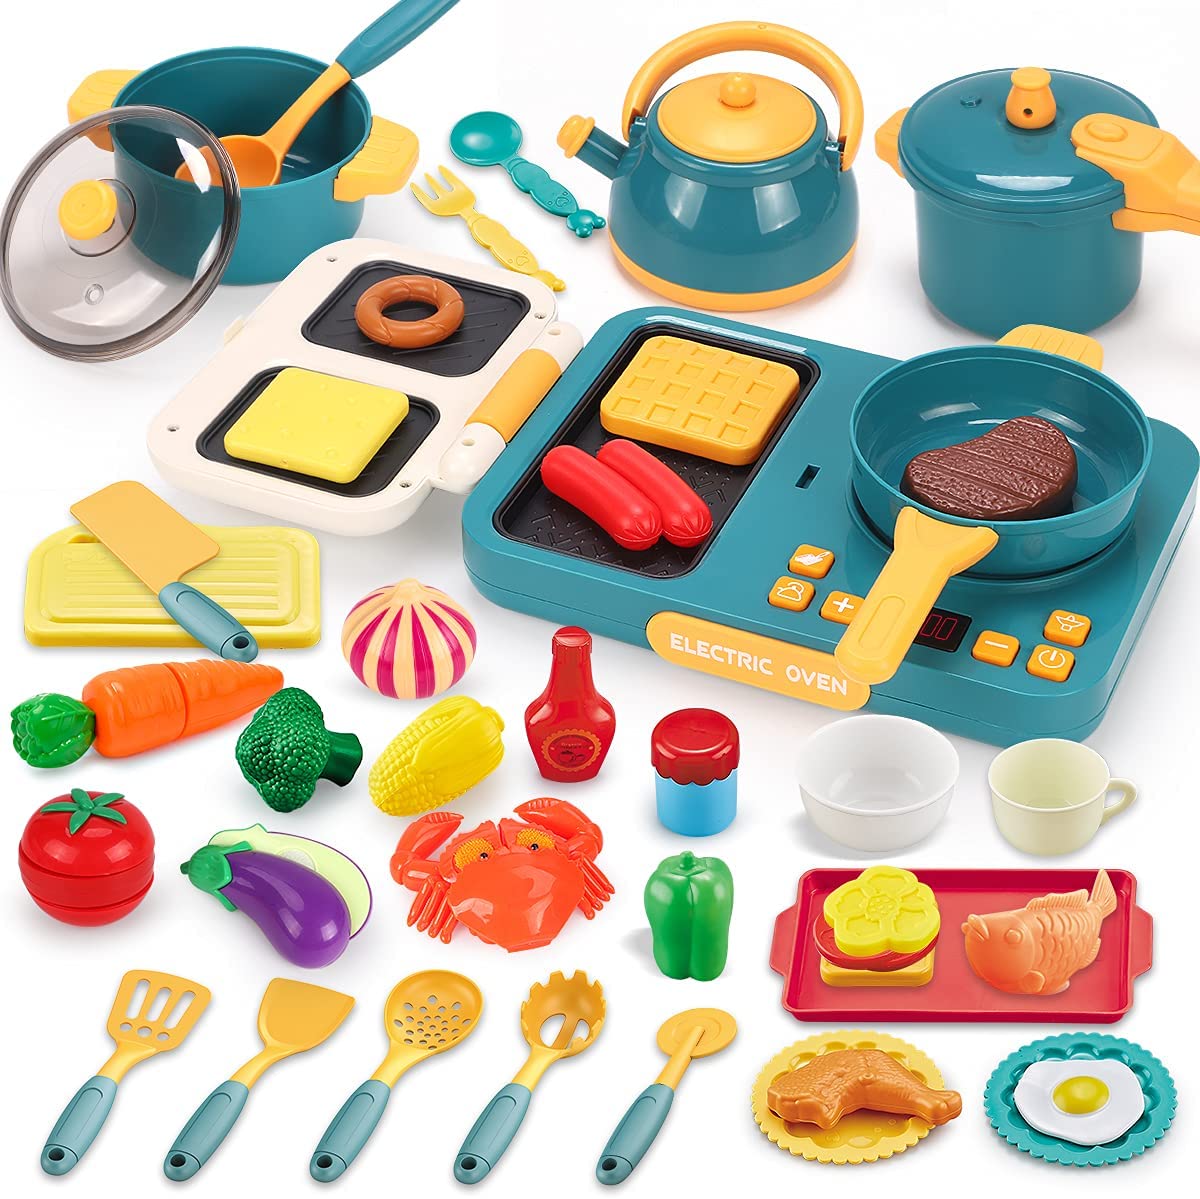 Kids Fun Play Food Cutting Set Kitchen Cooking Toys Role Play Pretend Gift 